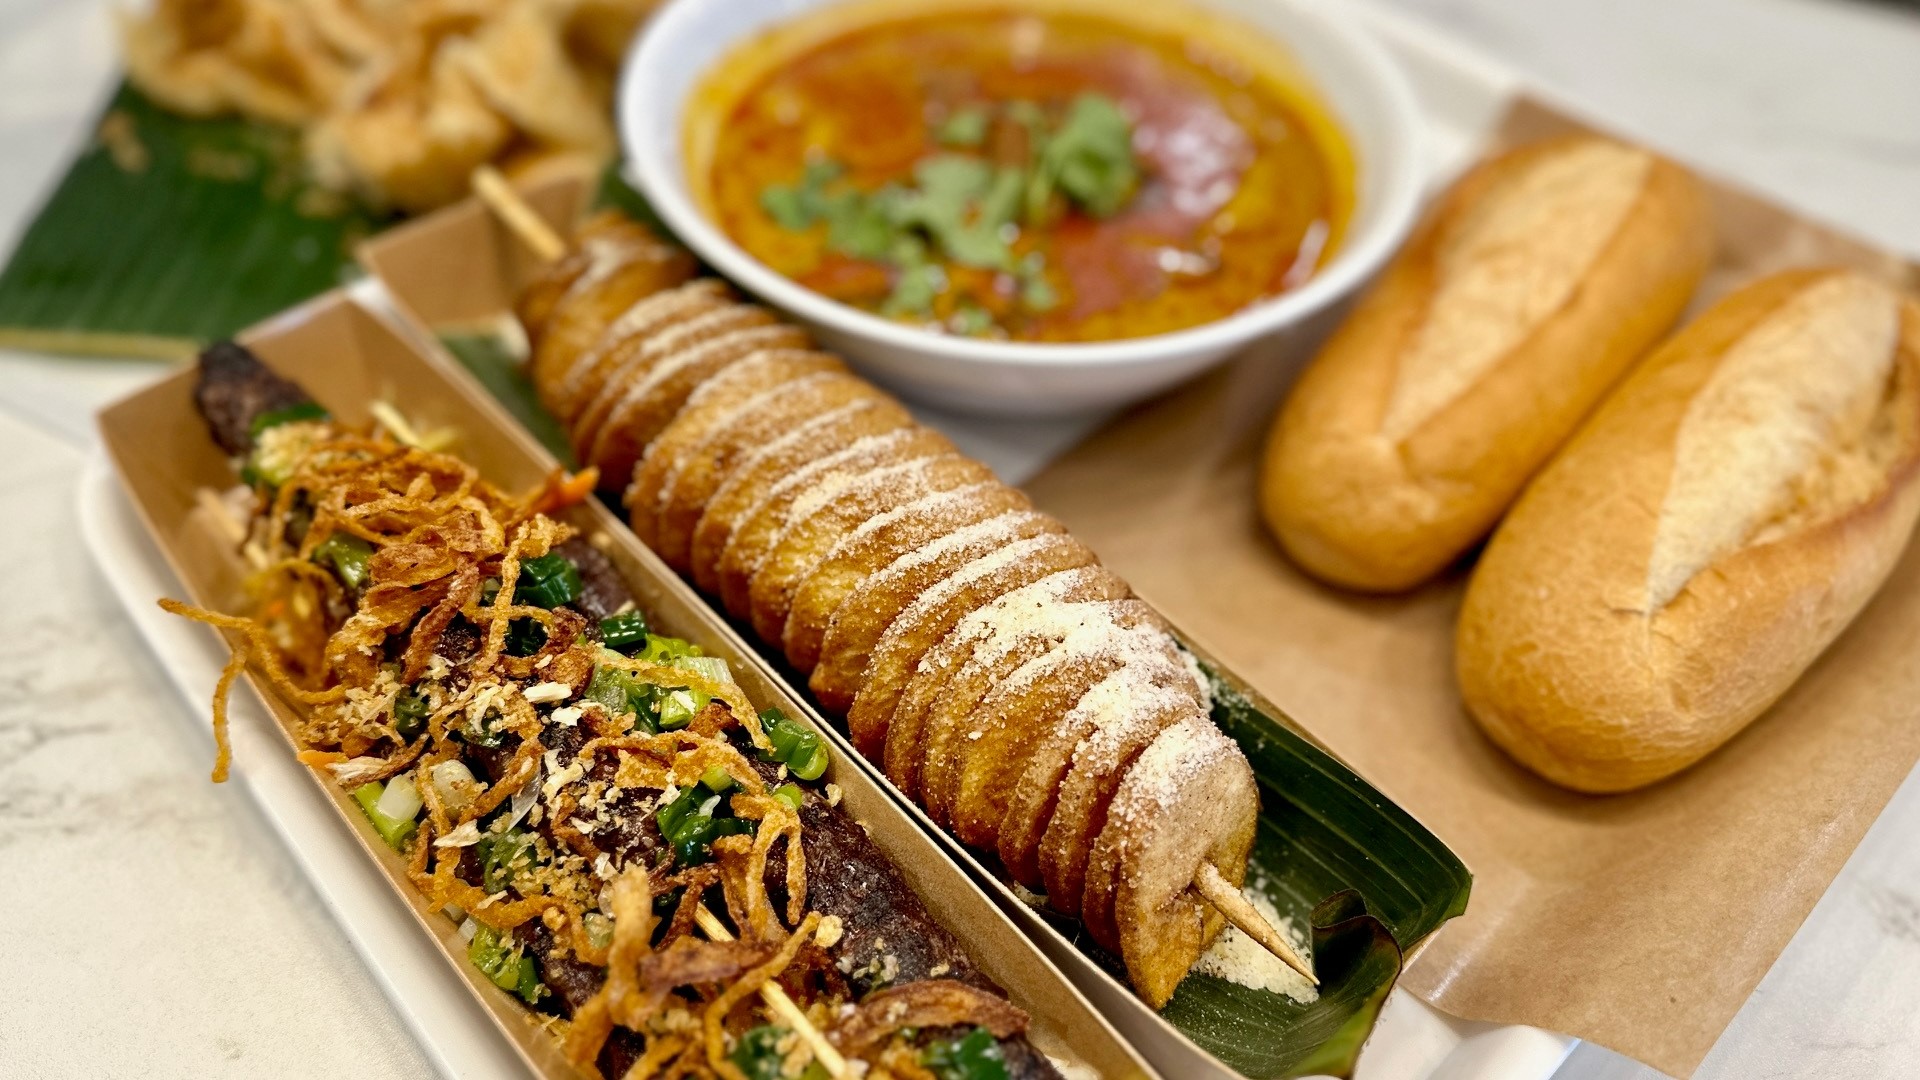 Salima Specialties in the Skyway neighborhood features authentic halal street food from Southeast Asia. #k5evening